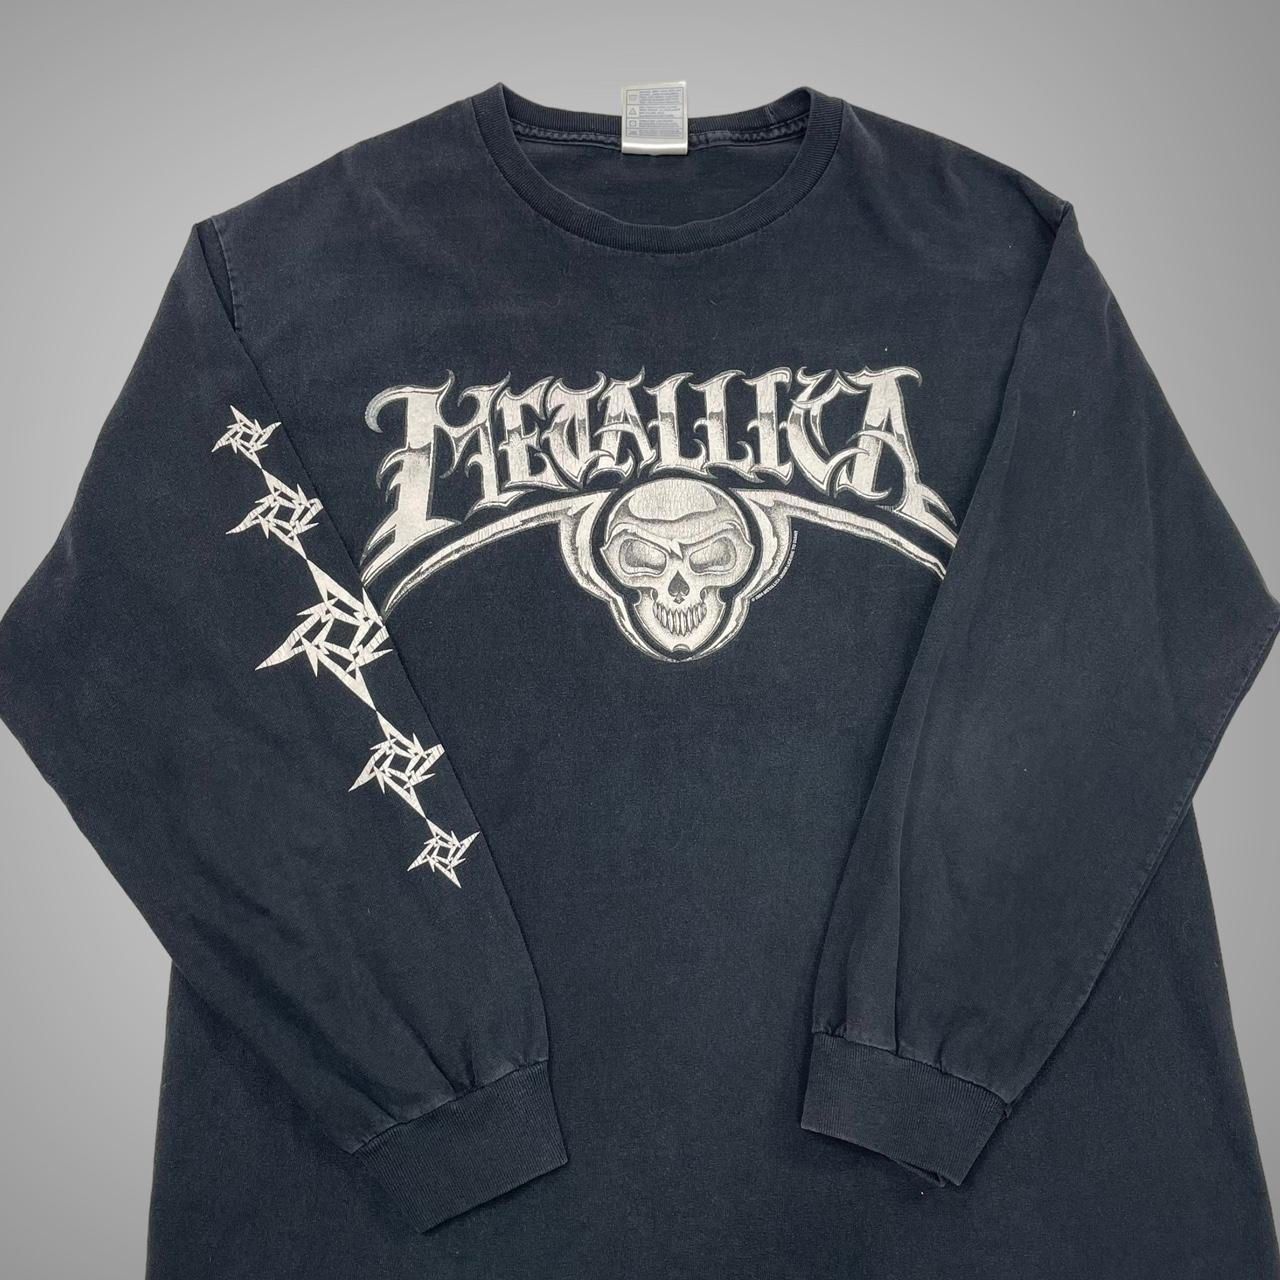 This Metallica long sleeve shirt!! Size small!! for - Depop